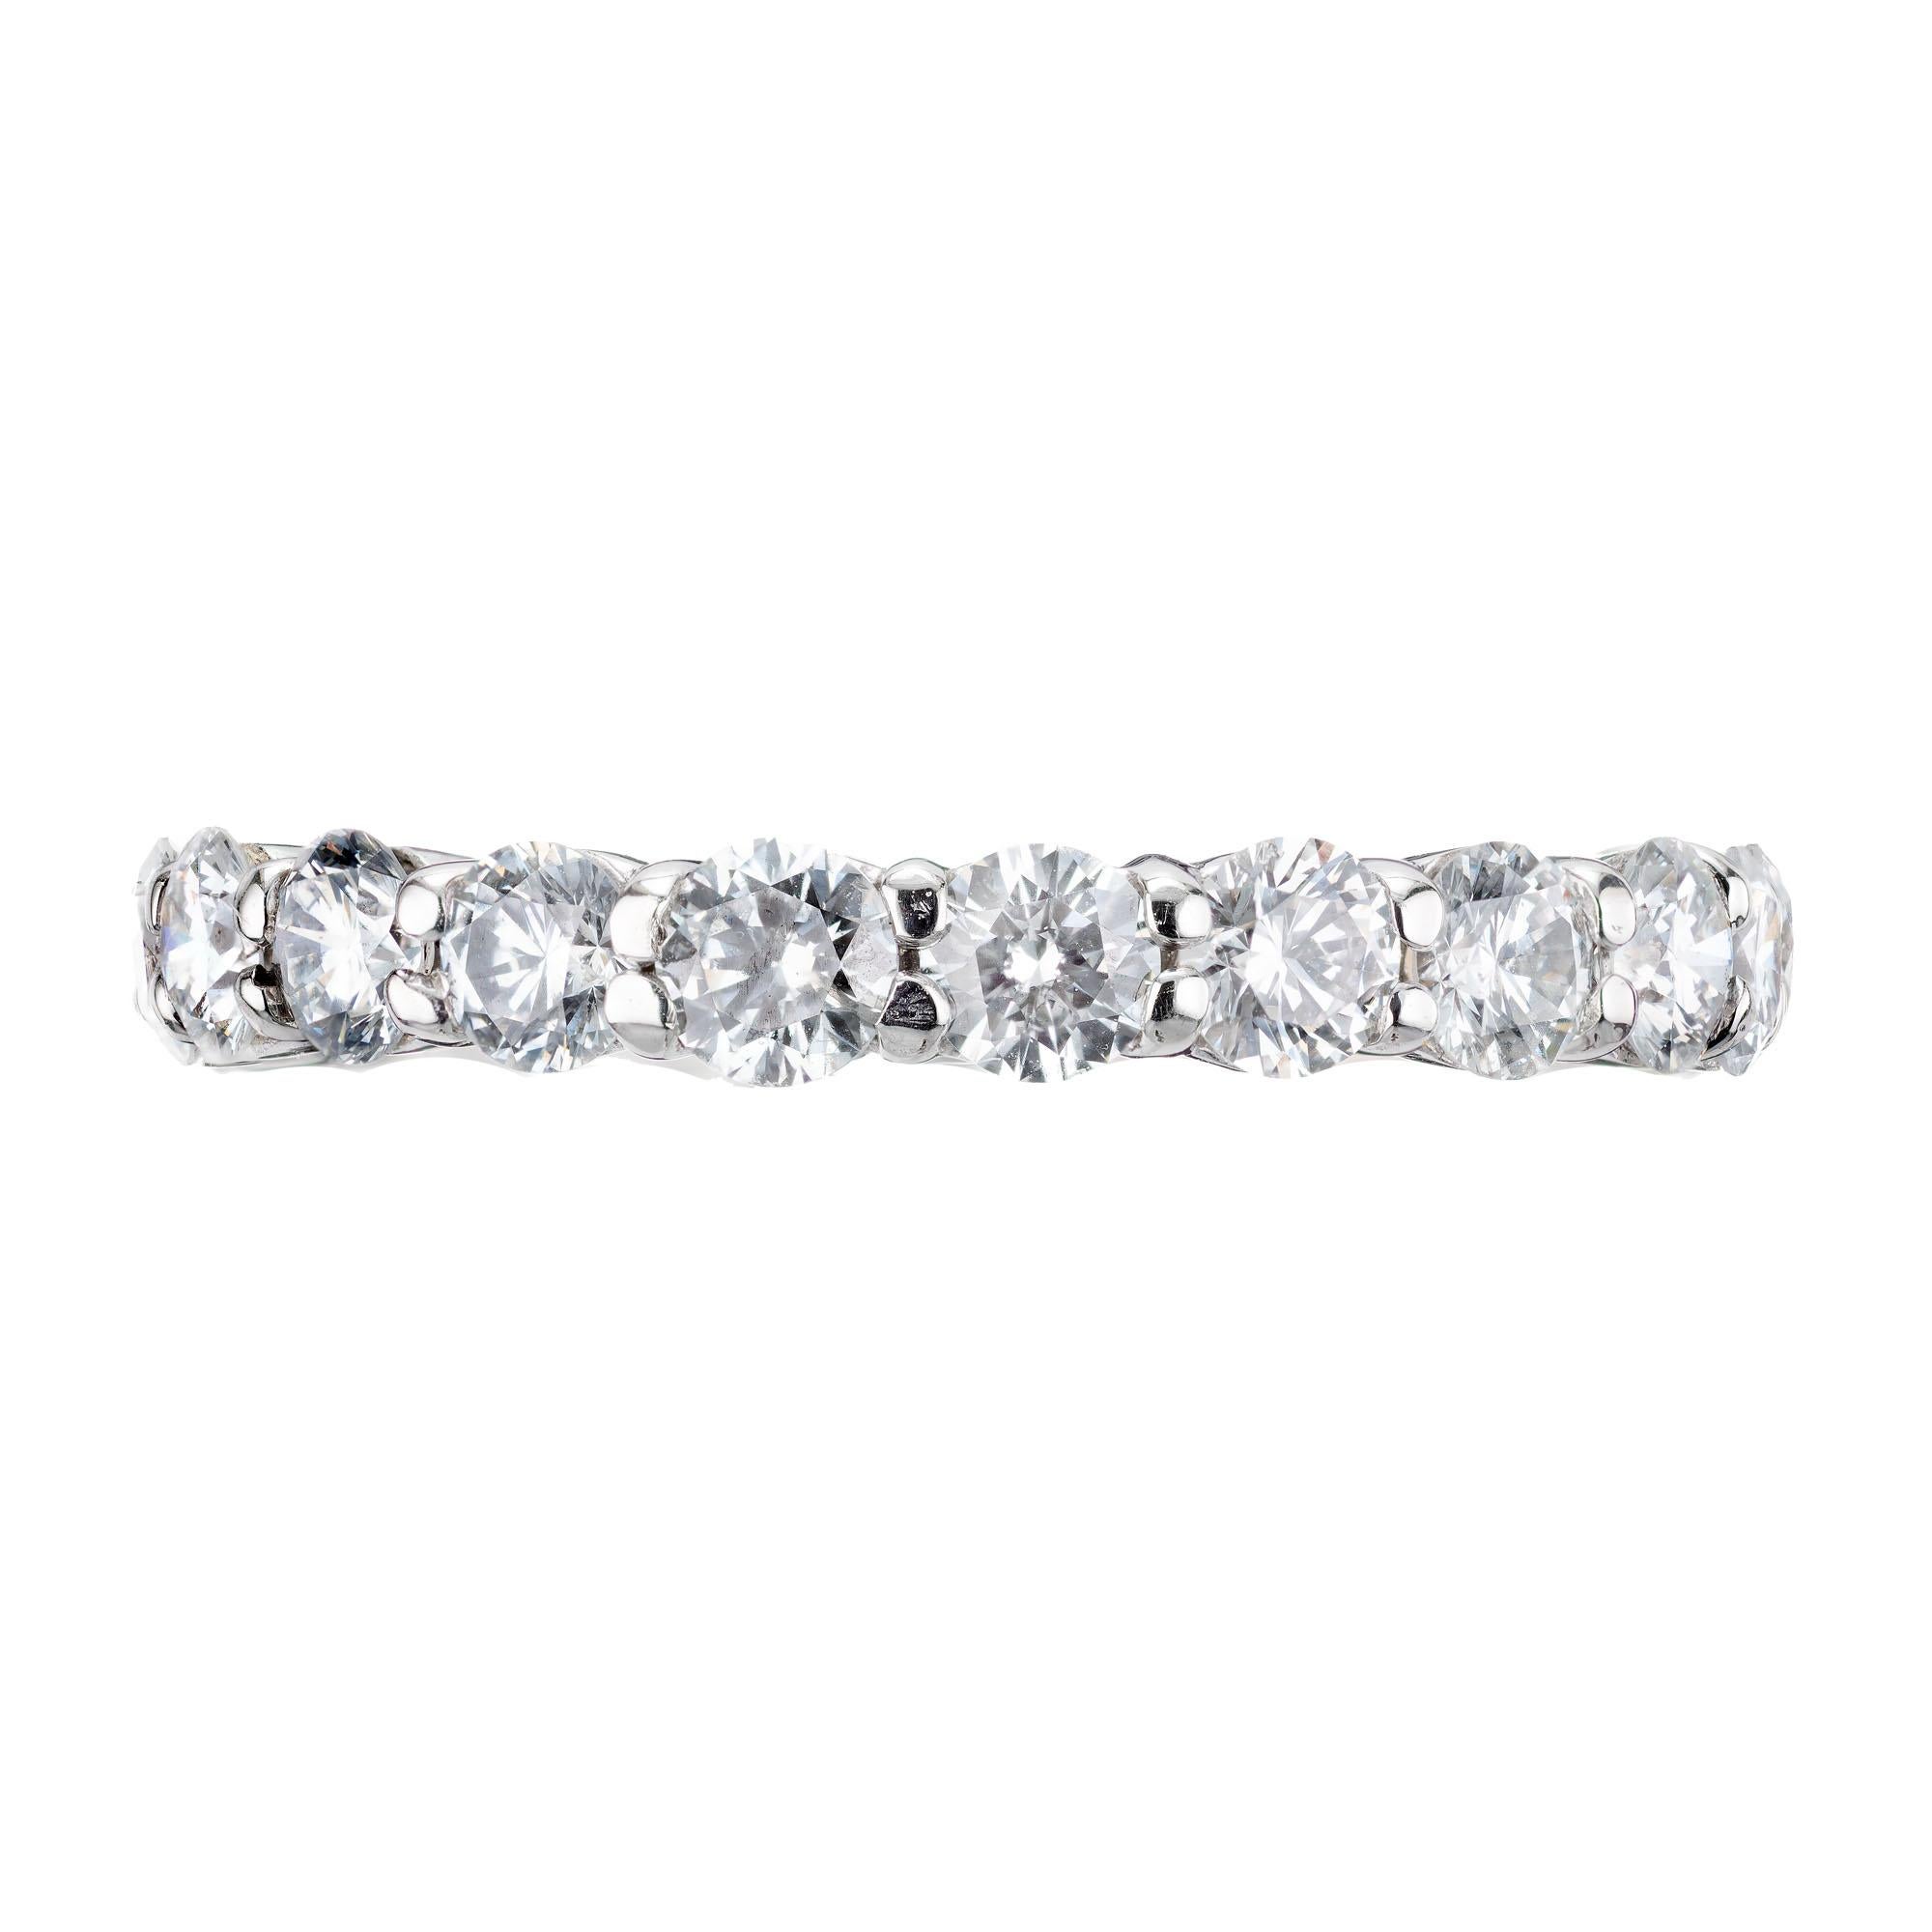 1.76 carat round diamonds in an eternity platinum common prong wedding band setting.  

20 round brilliant cut diamonds H-I VS2, approx. 1.76cts
Size 5.5 and sizable 
Platinum 
Stamped: PLAT
3.1 grams
Width at top: 2.95mm
Hight at top: 2.1mm
Width